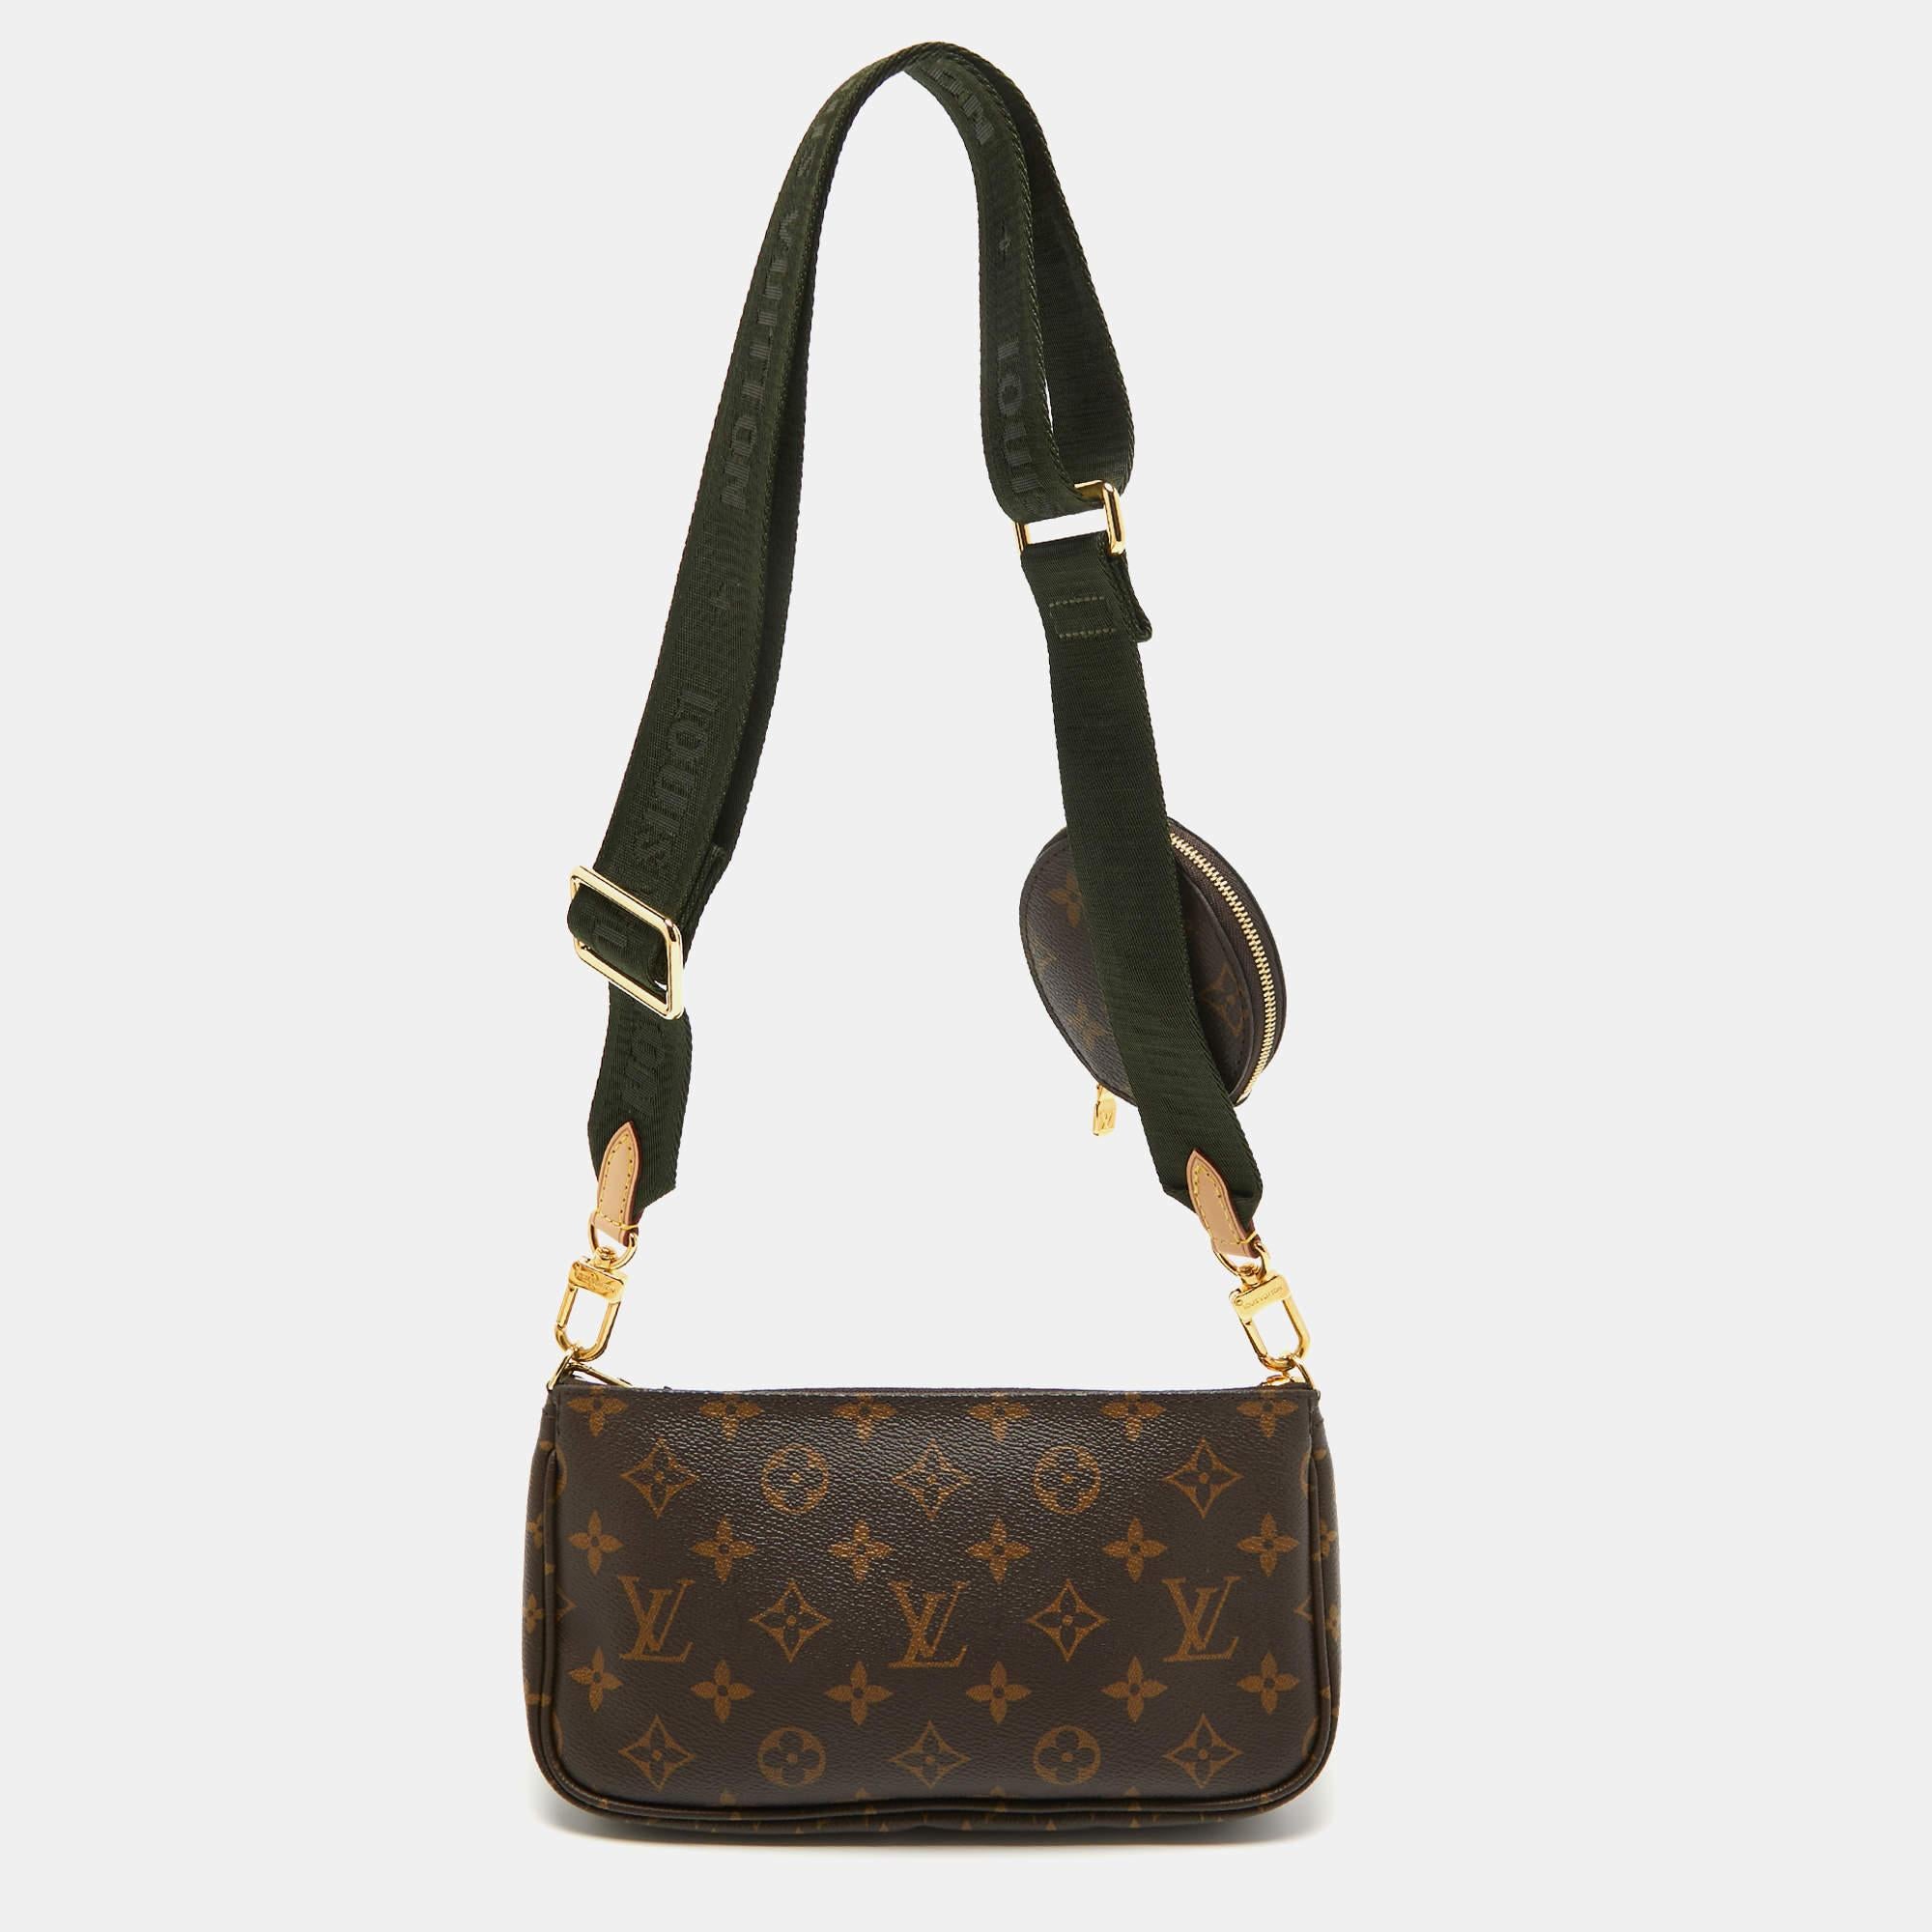 The Louis Vuitton Multi Pochette Accessories Bag is a stylish and versatile accessory. Its monogram canvas features the iconic LV pattern. The multi-compartment design includes a detachable coin pouch, mini pouch, and adjustable shoulder strap,